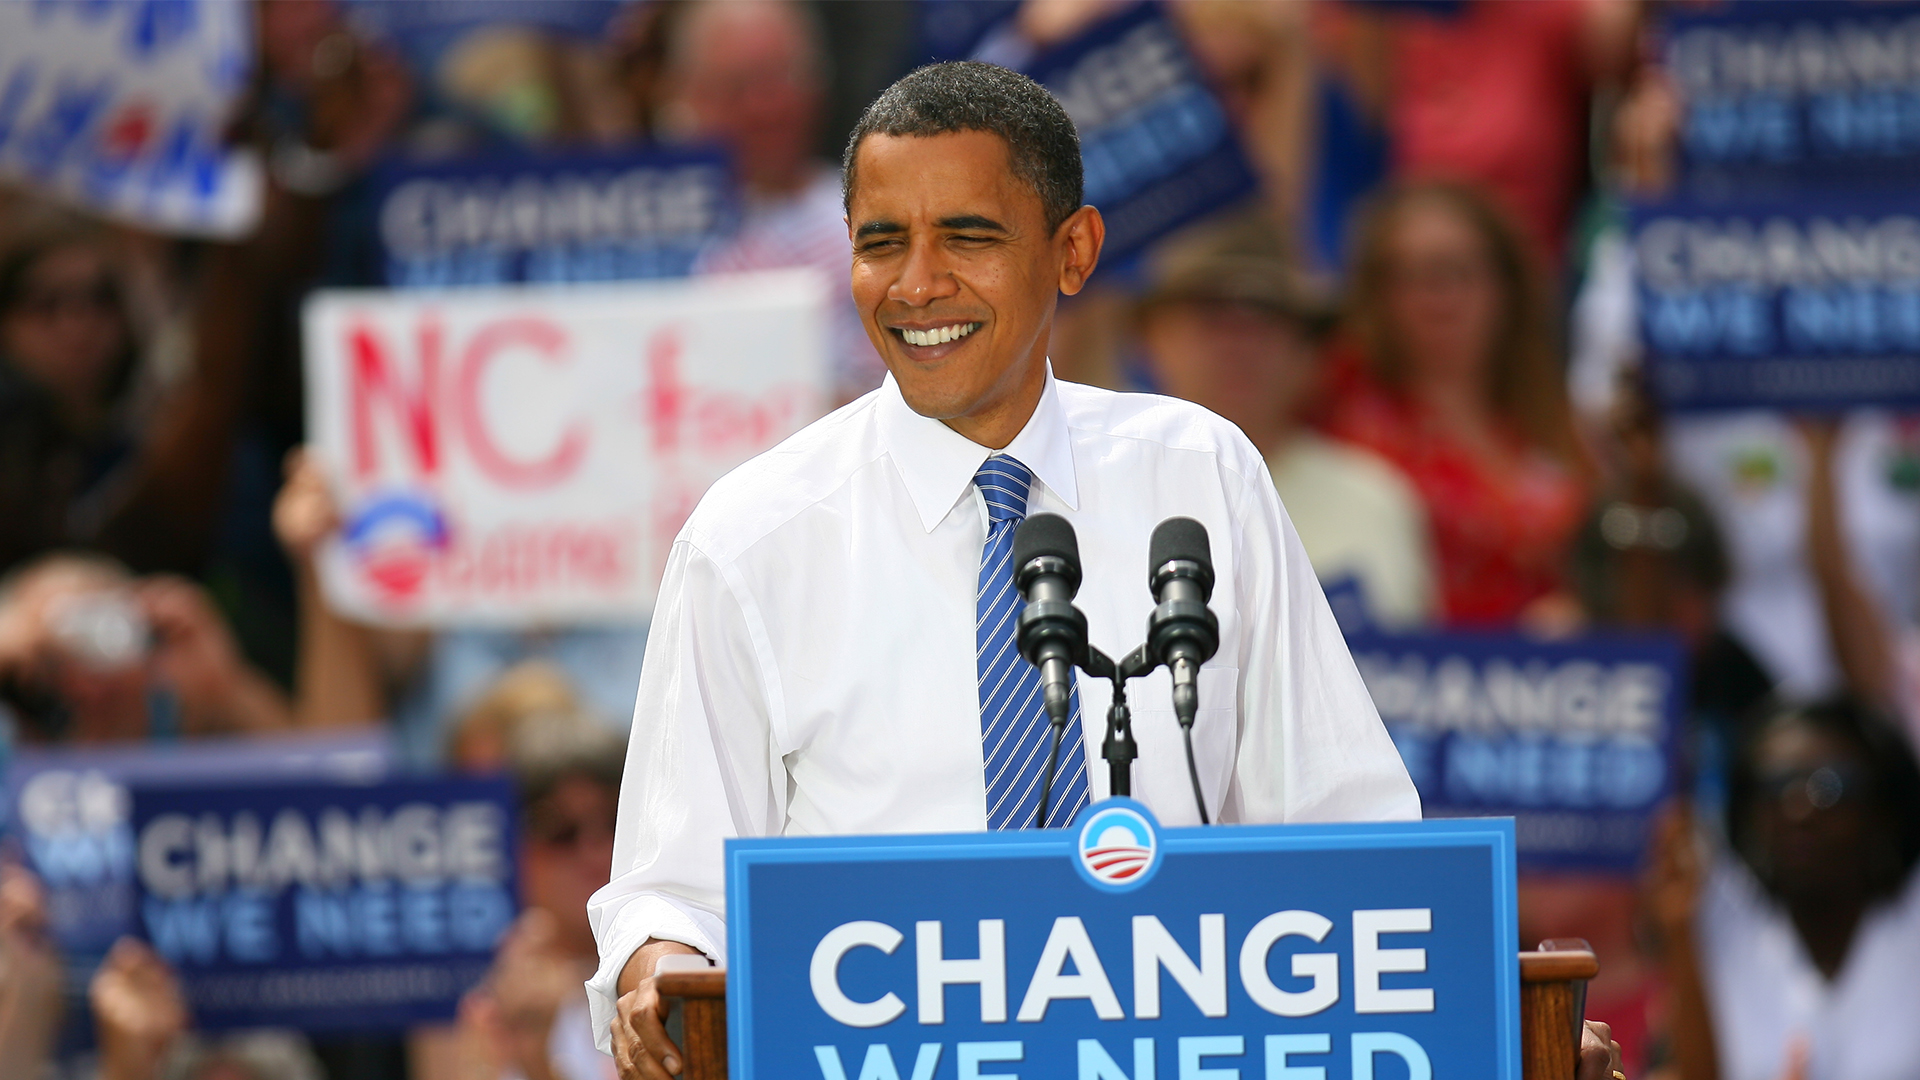 Yes we can": is Barack Obama changing politics?